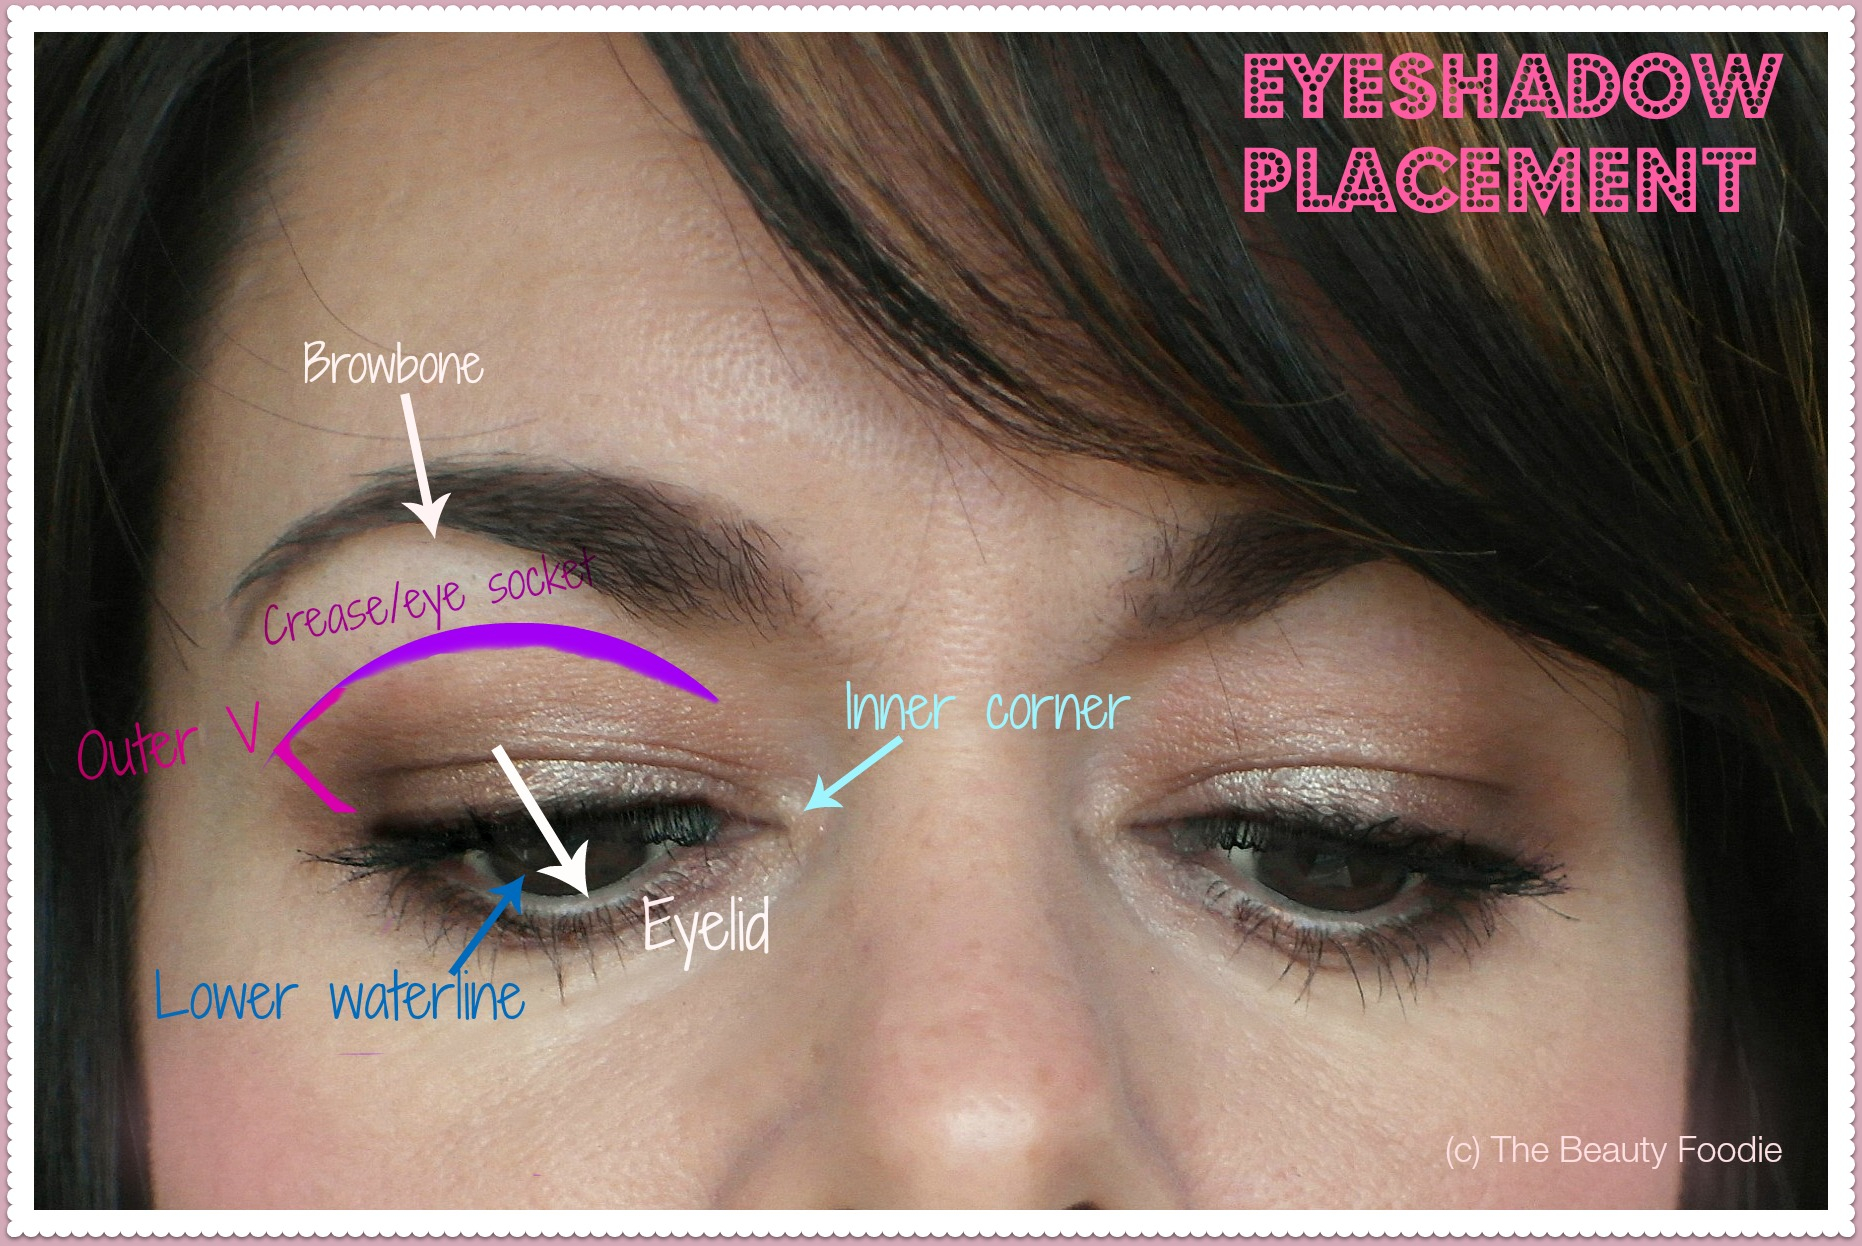 Applying Eye Makeup Eyeshadow Placement Where Do I Apply It The Beauty Foodie